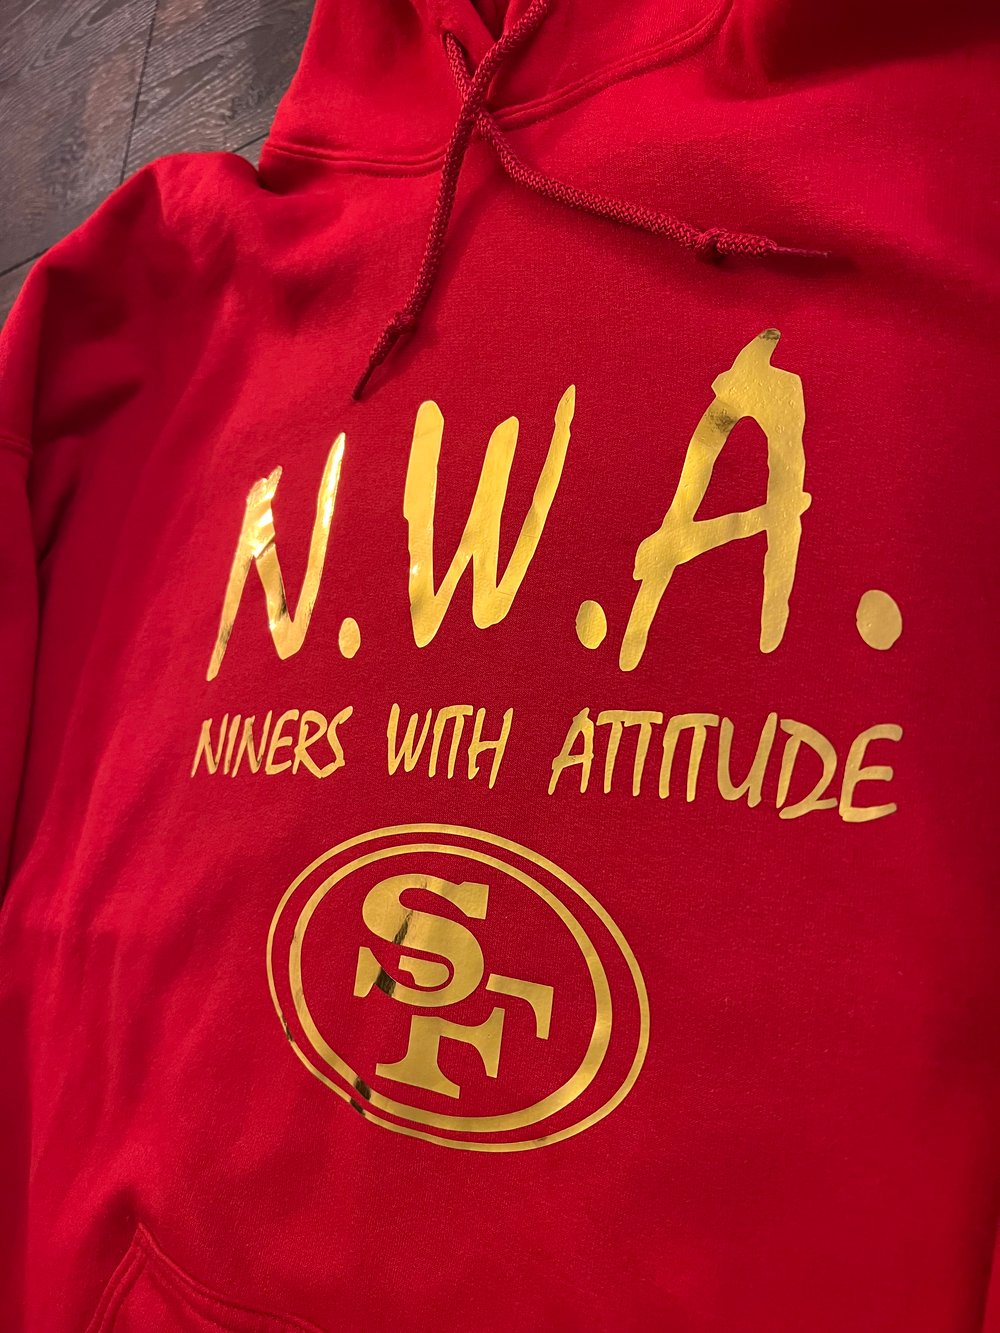 N.W.A. RED HOODIE, METALLIC GOLD LETTERS